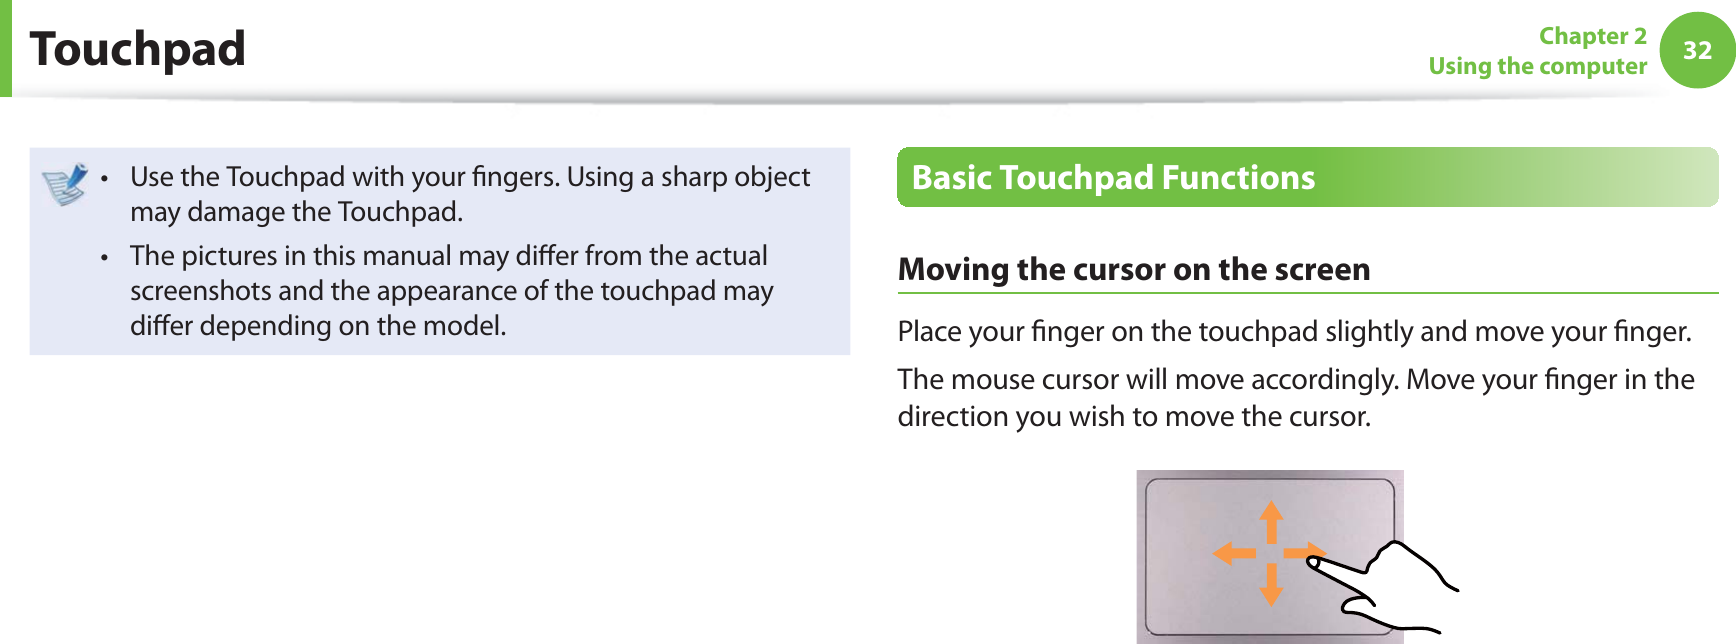 32Chapter 2Using the computerUse the Touchpad with your  ngers. Using a sharp object t may damage the Touchpad.The pictures in this manual may di er from the actual t screenshots and the appearance of the touchpad may di er depending on the model.Basic Touchpad FunctionsMoving the cursor on the screenPlace your  nger on the touchpad slightly and move your  nger.The mouse cursor will move accordingly. Move your  nger in the direction you wish to move the cursor. Touchpad